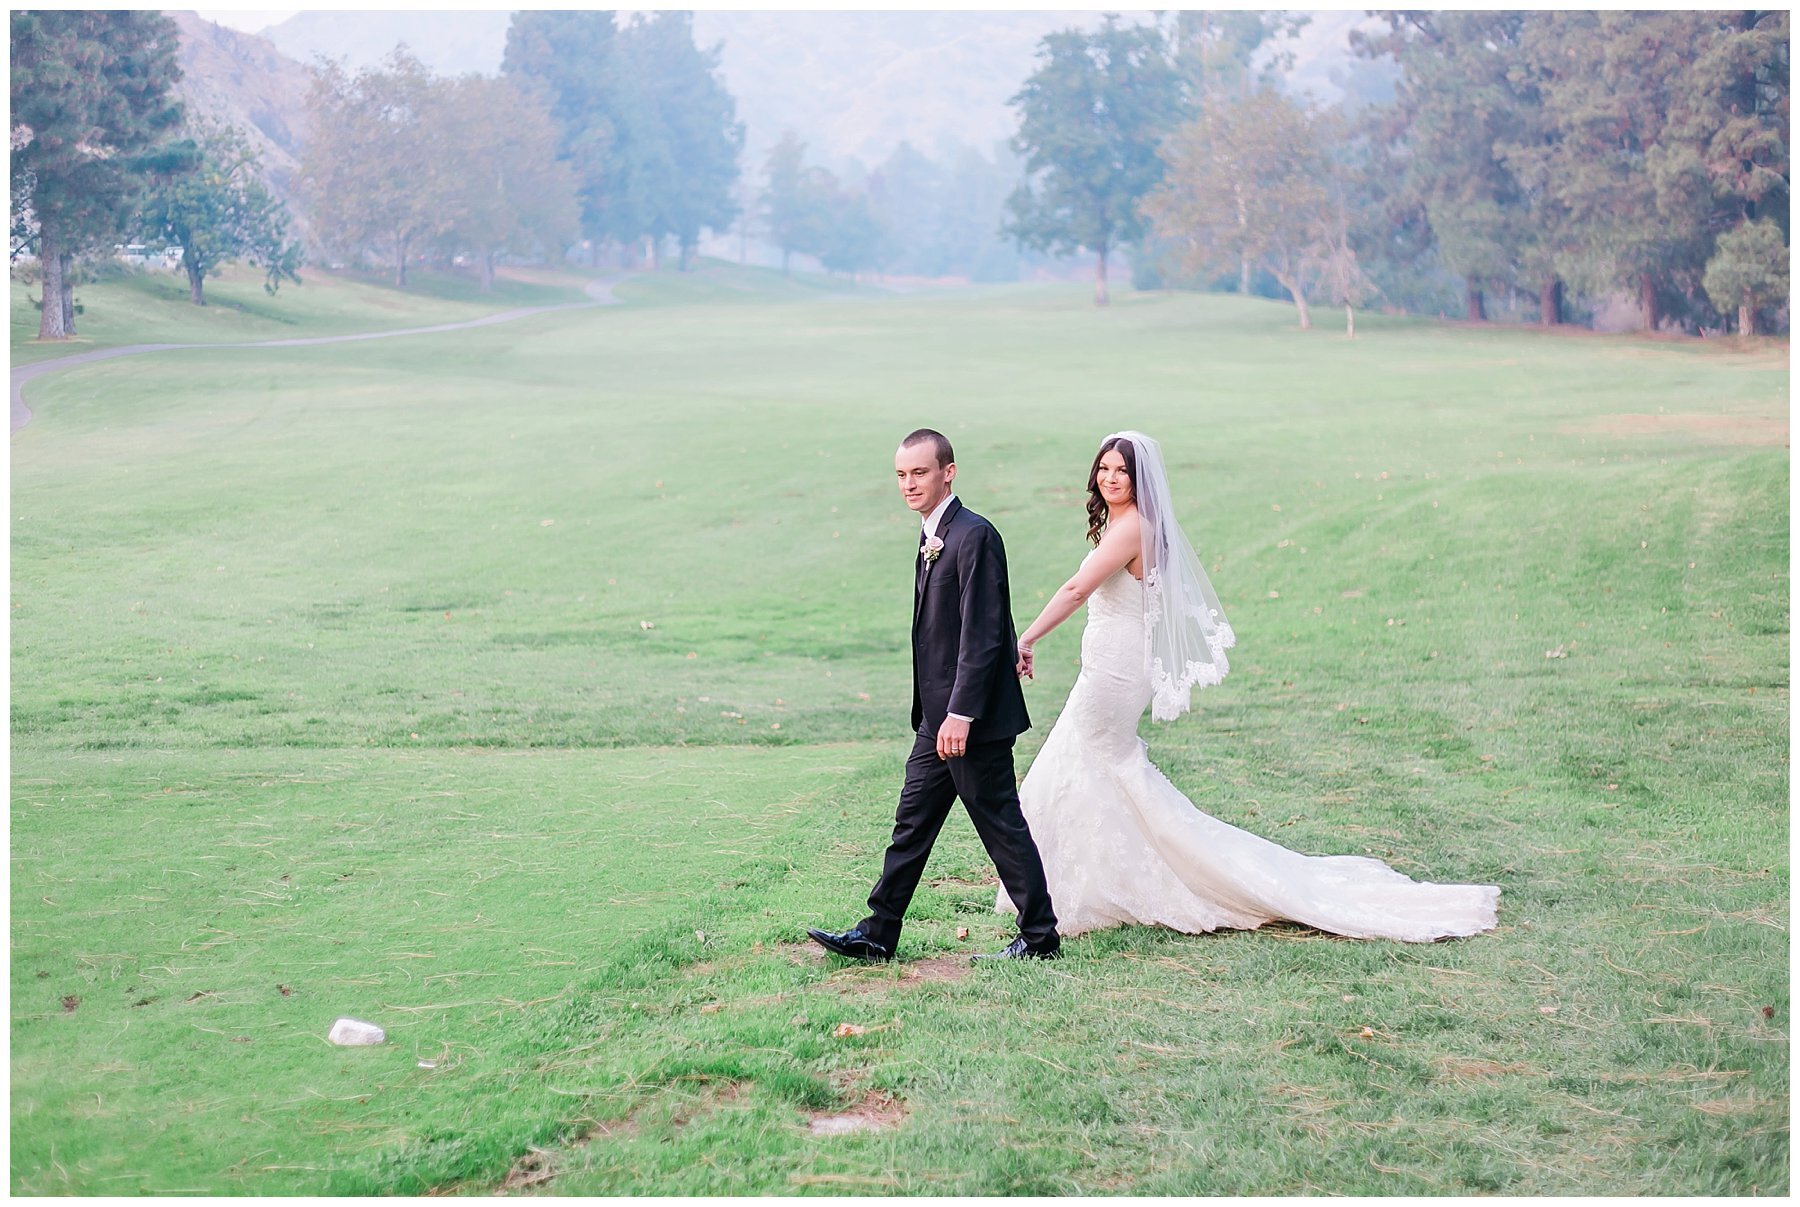  groom leading the bride through the golf course by the hand 